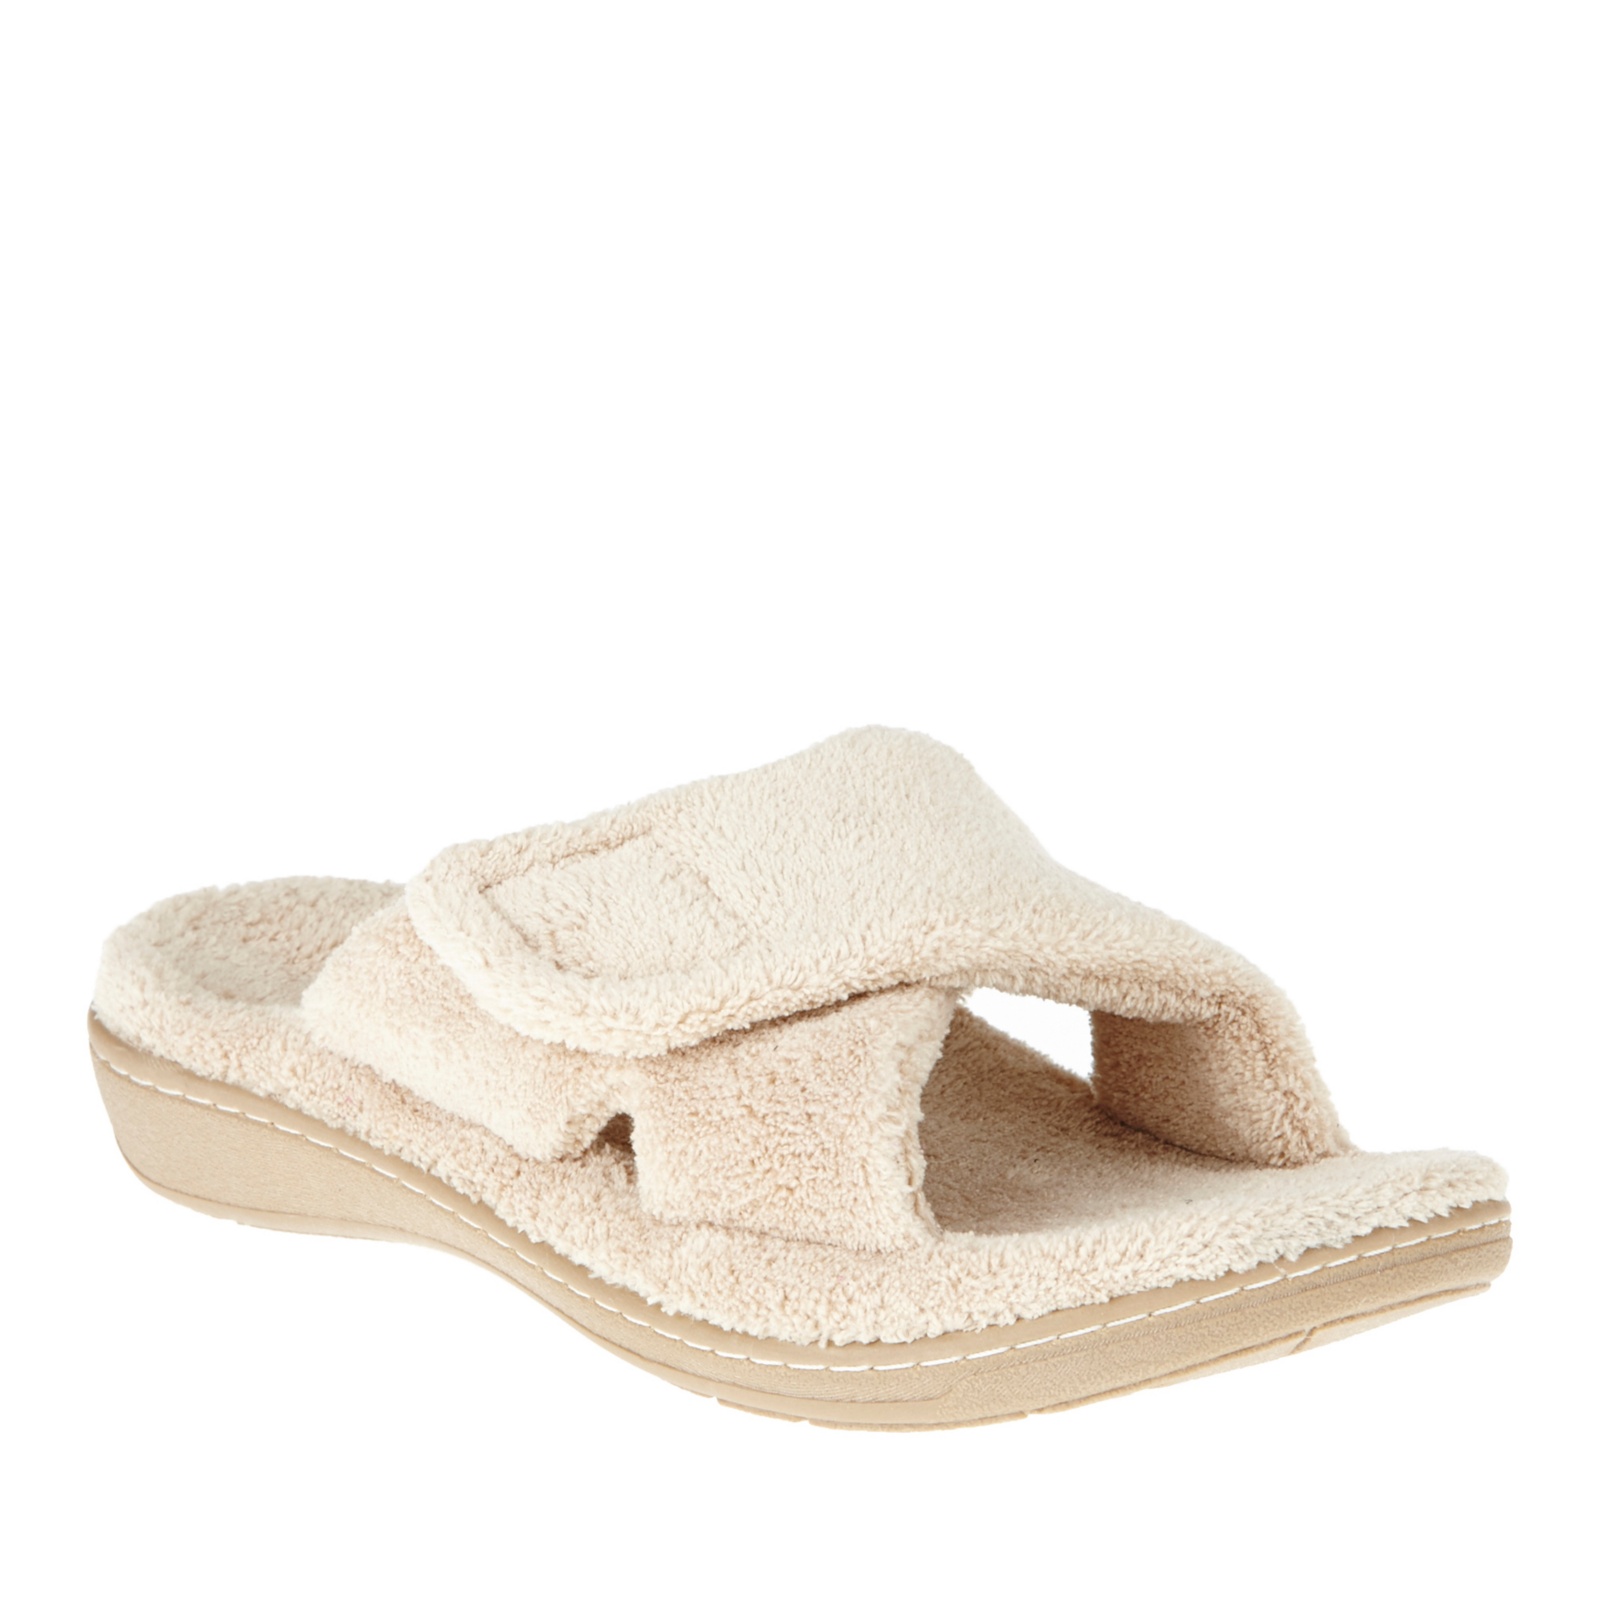 Relax women Orthaheel Womens slippers Slippers relax for orthaheel